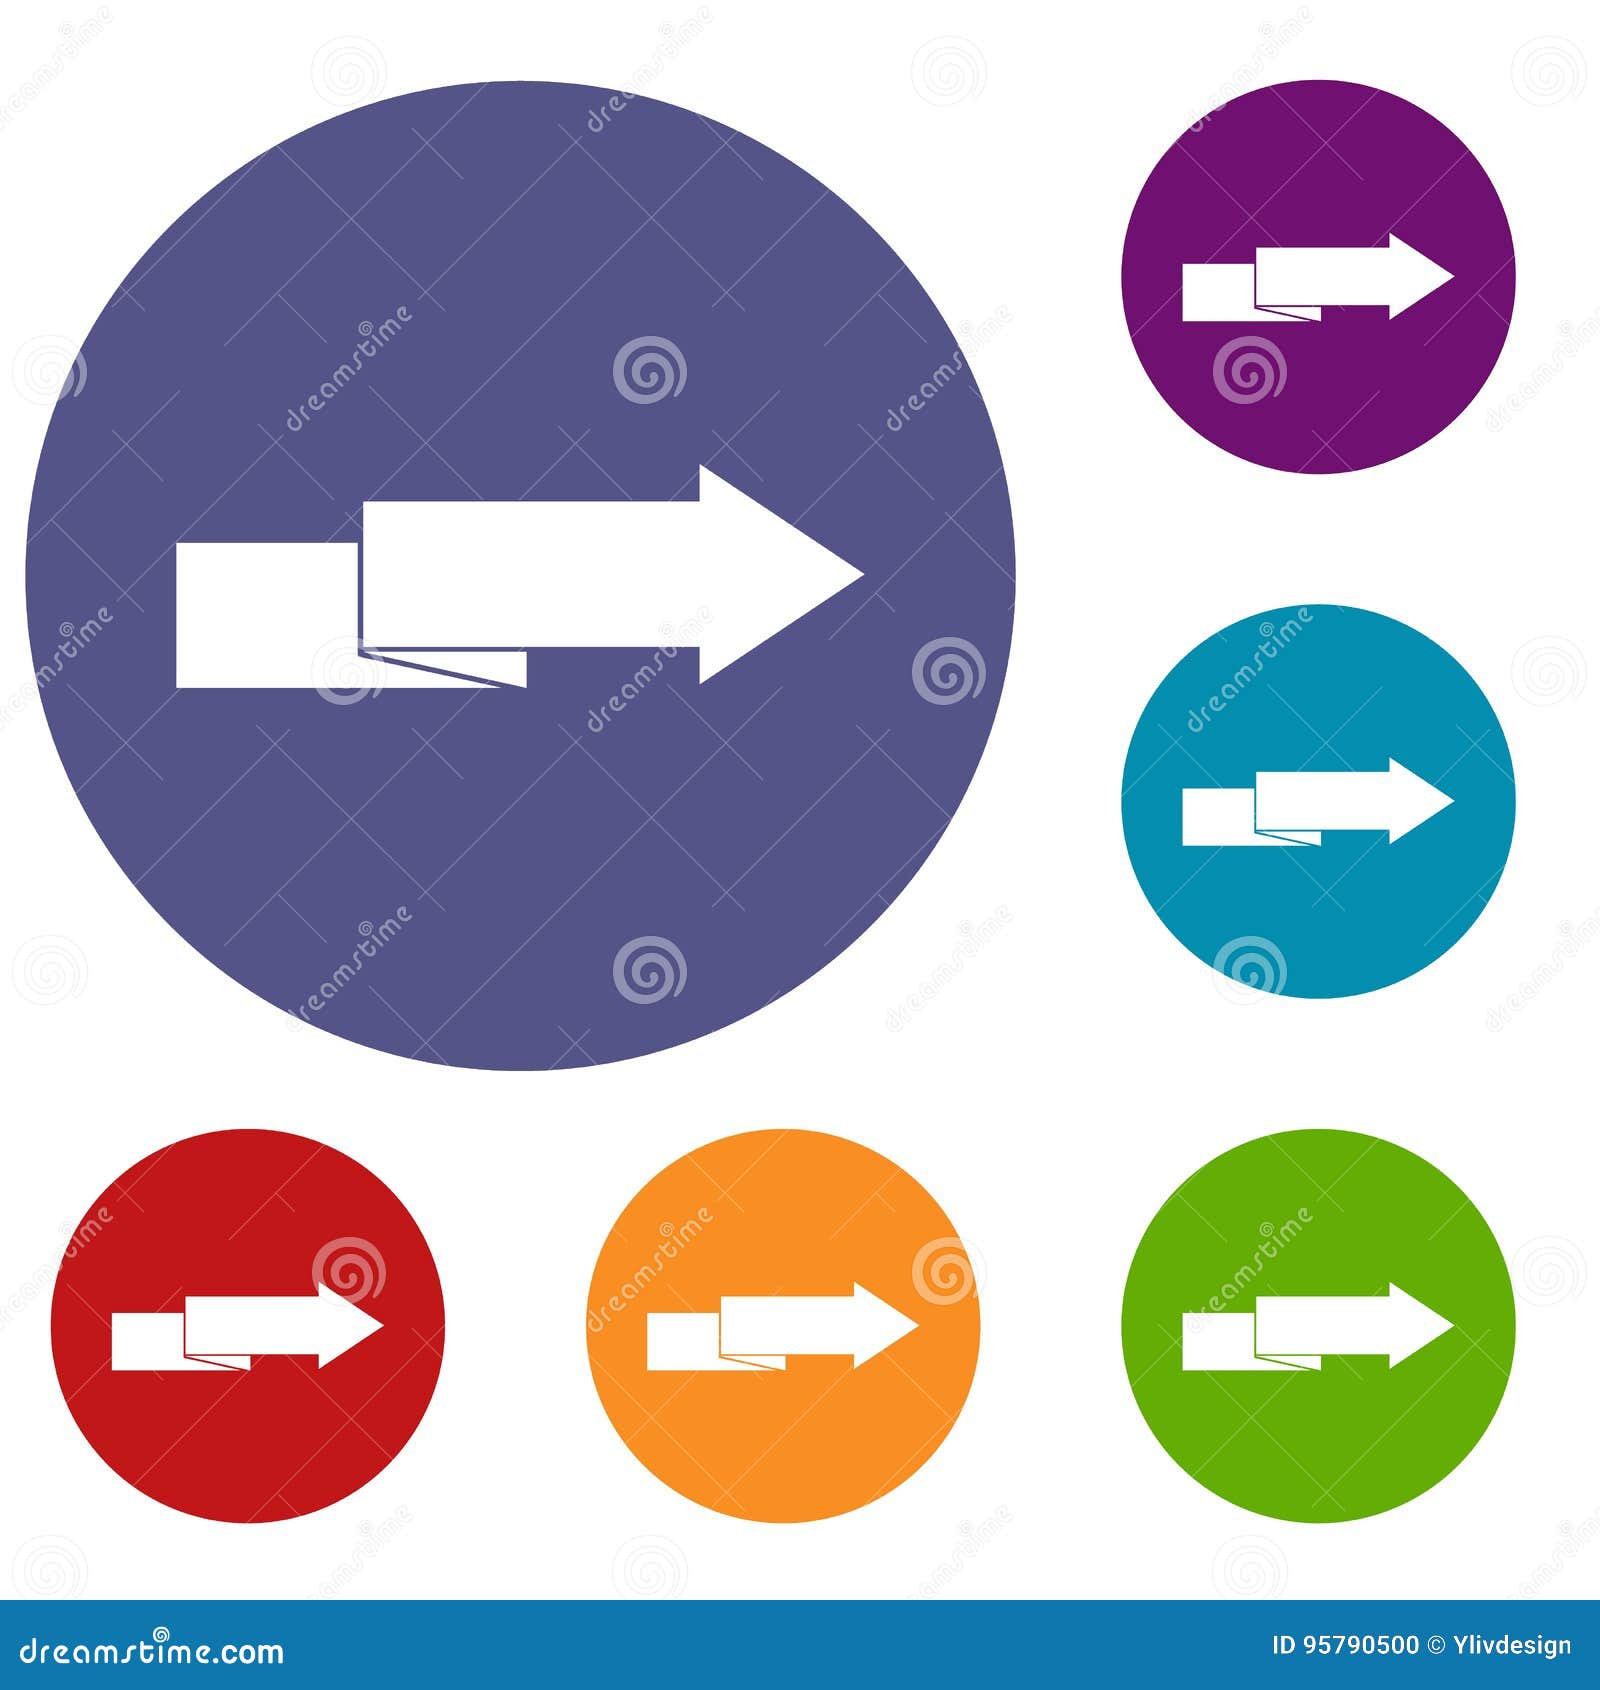 Arrow To Right Icons Set Stock Vector Illustration Of Circle 95790500